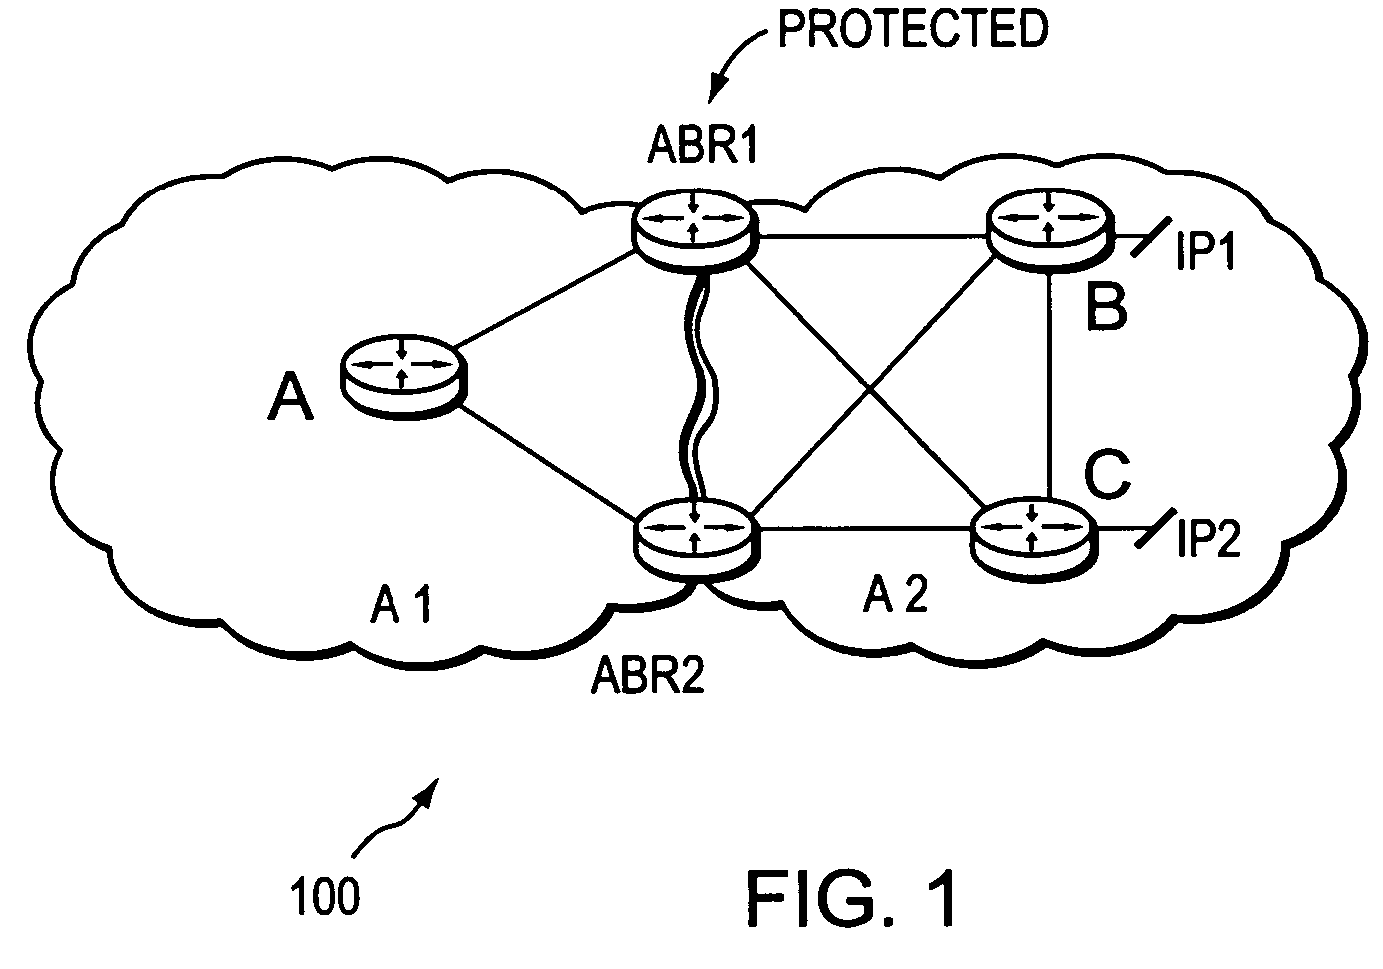 Efficient mechanism for fast recovery in case of border router node failure in a computer network